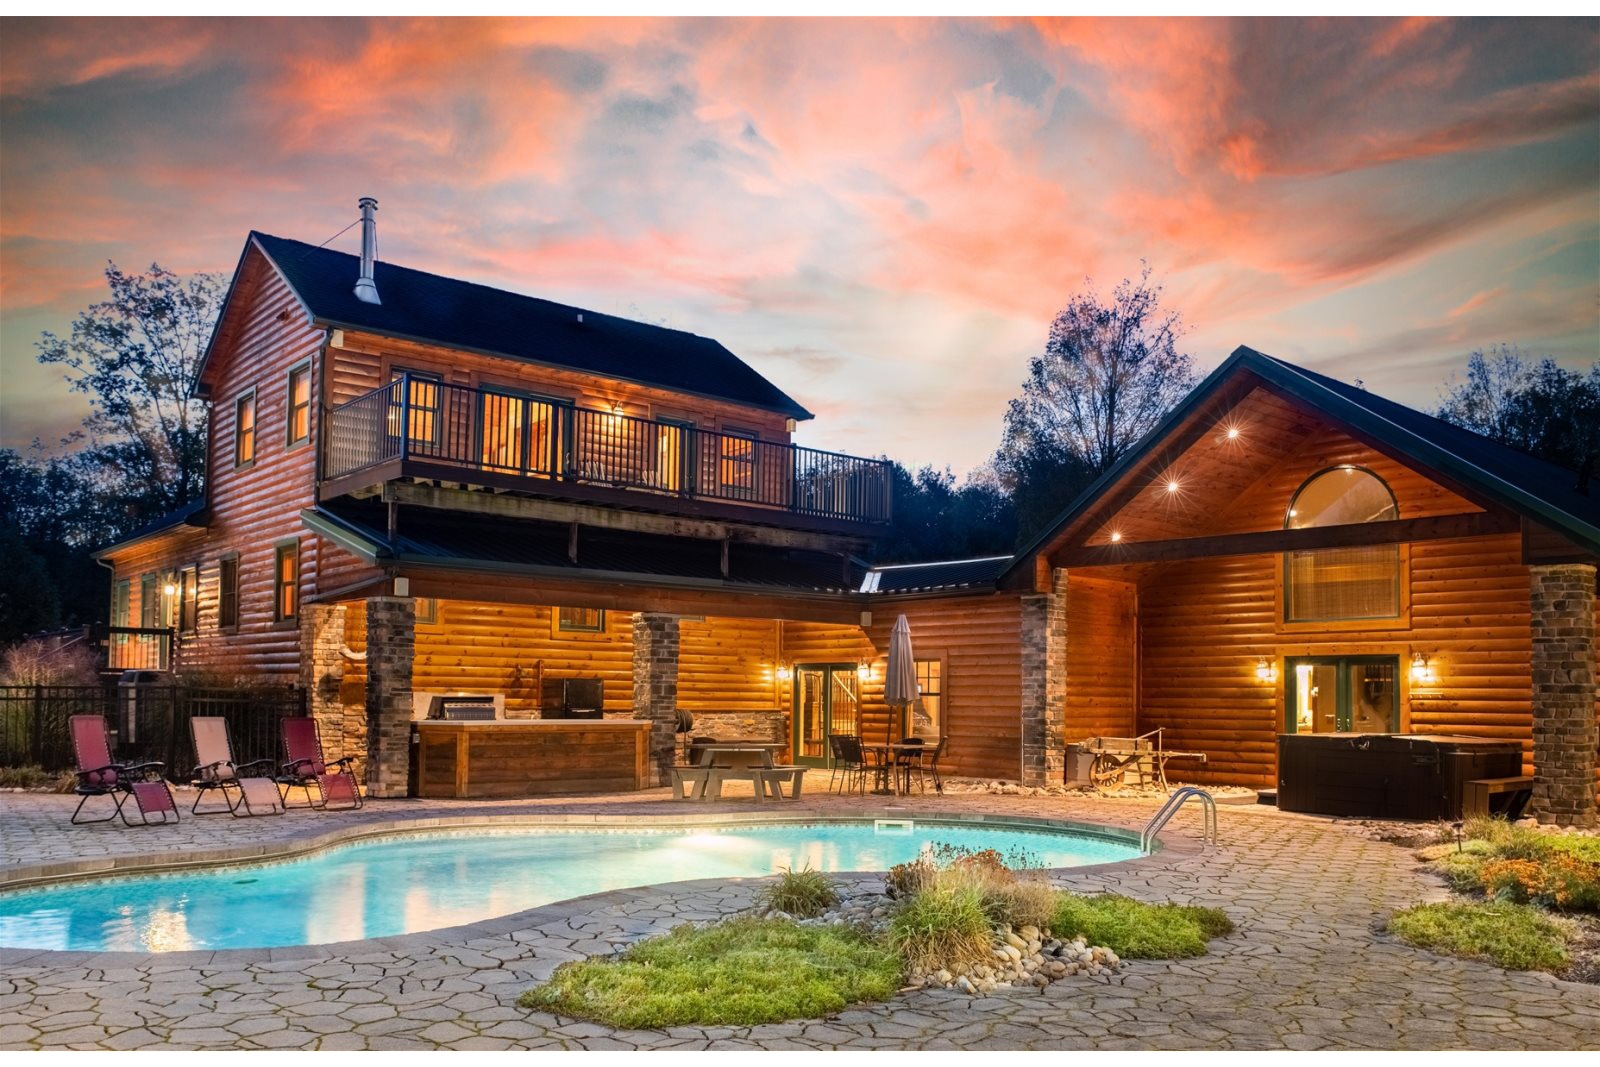 The Lodge at Springwater - Rent this Beautiful Property